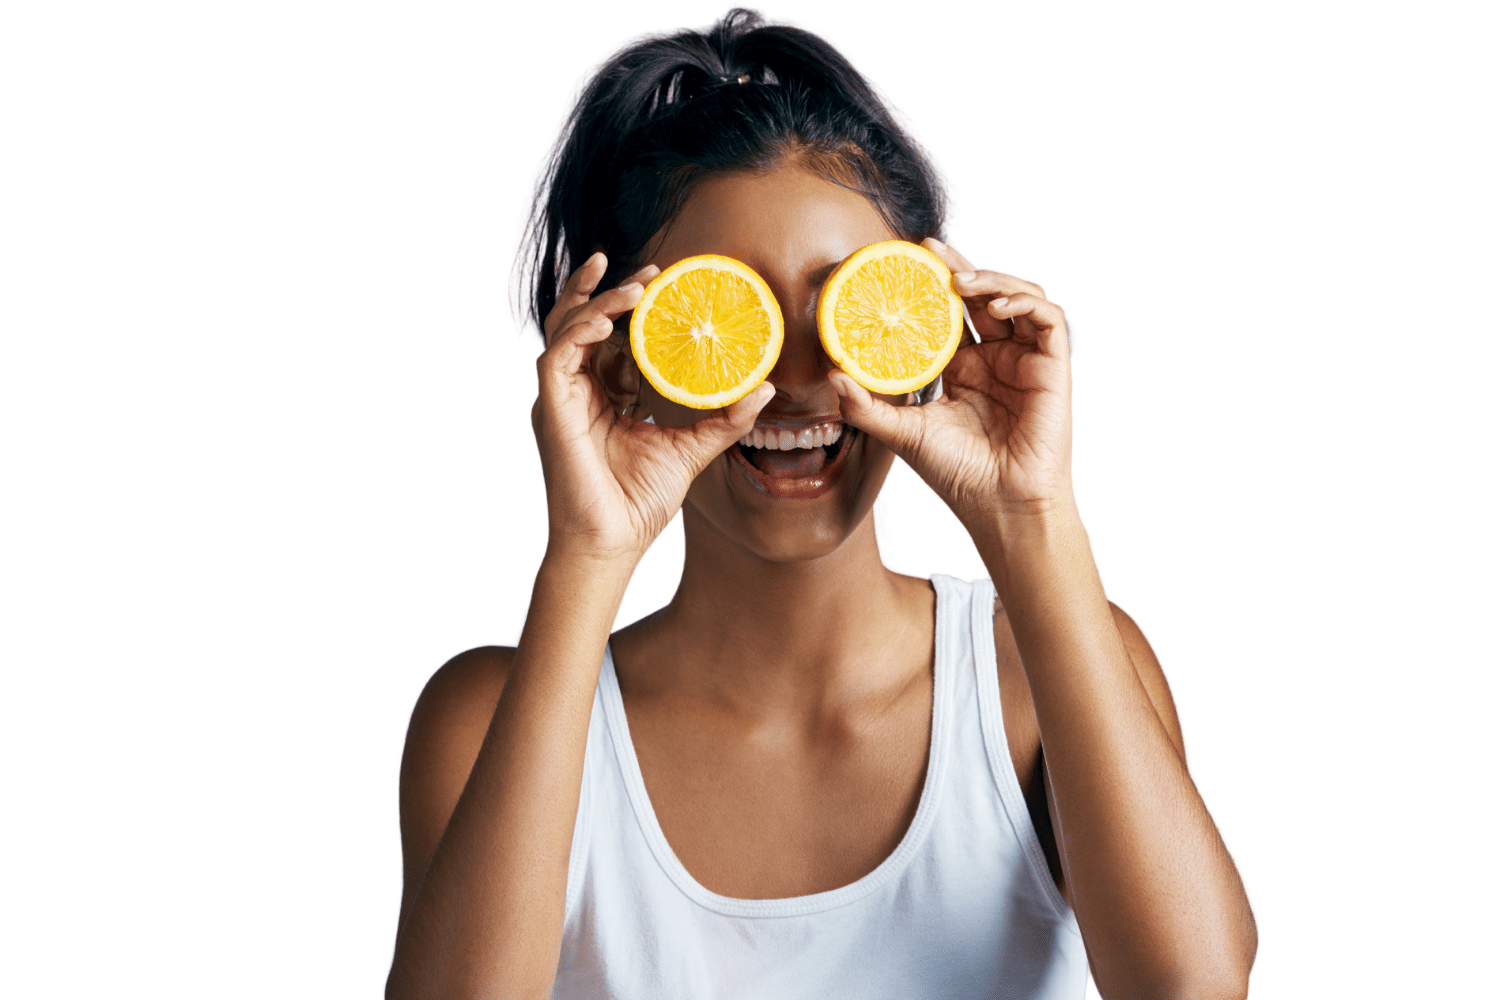 Is NutriFlair Liposomal Vitamin C Right For You? Pros and Cons